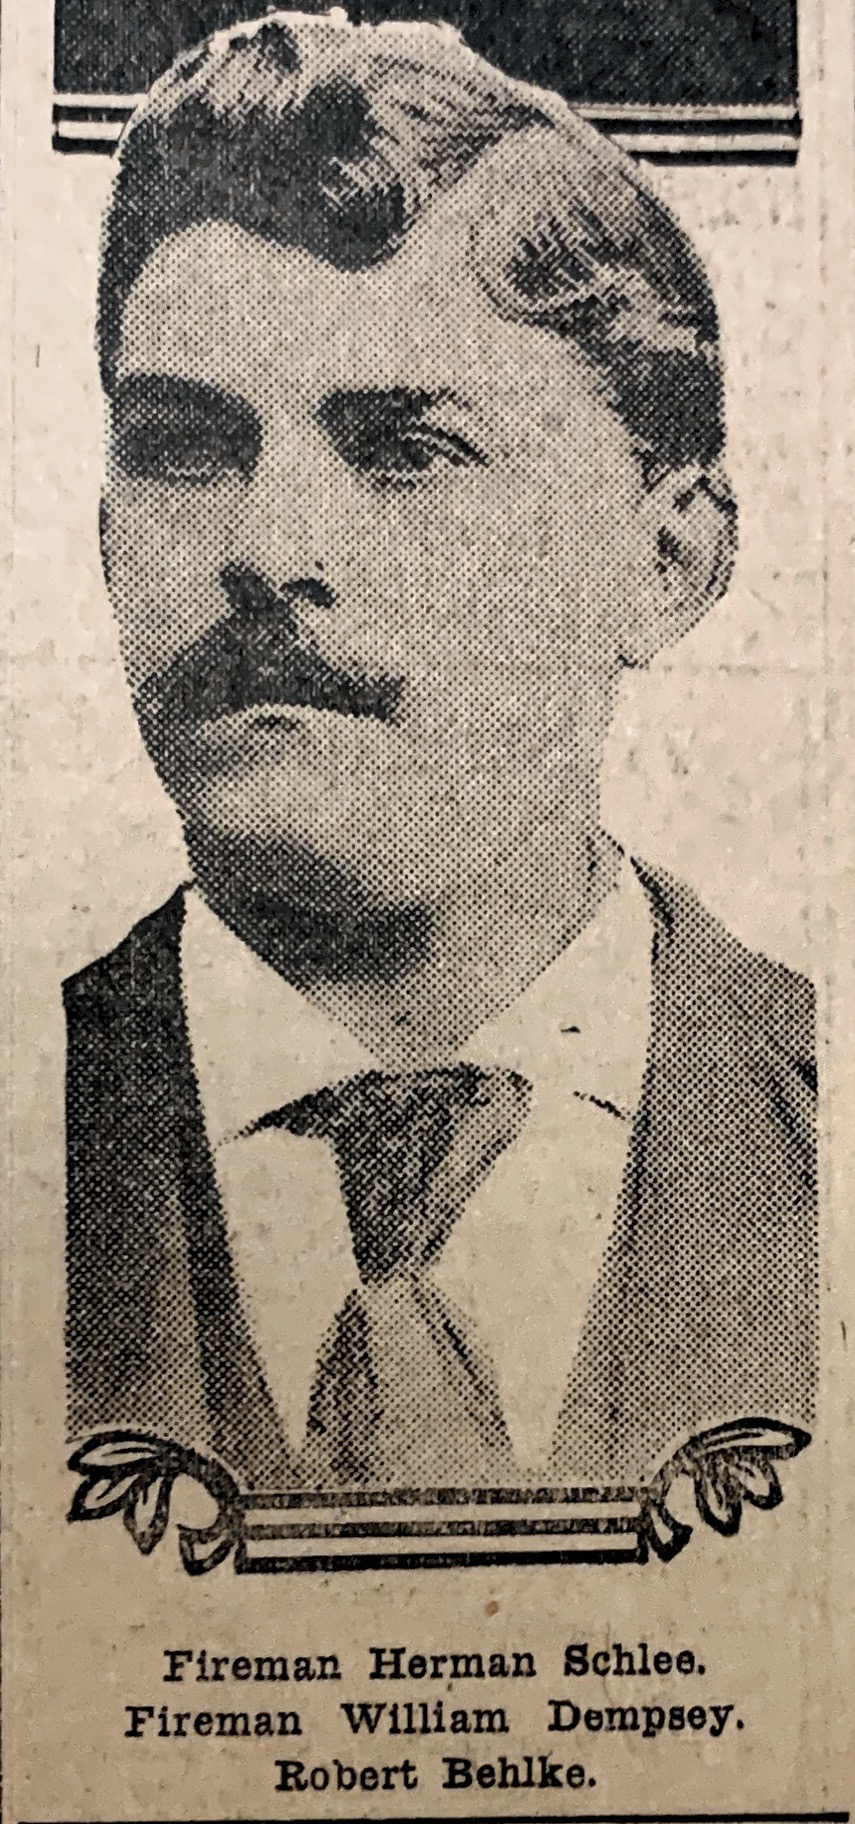 Rob Belki (Robs great-grandfather) jumped out of a four story burning building in Cleveland, OH and survived on May 10, 1910